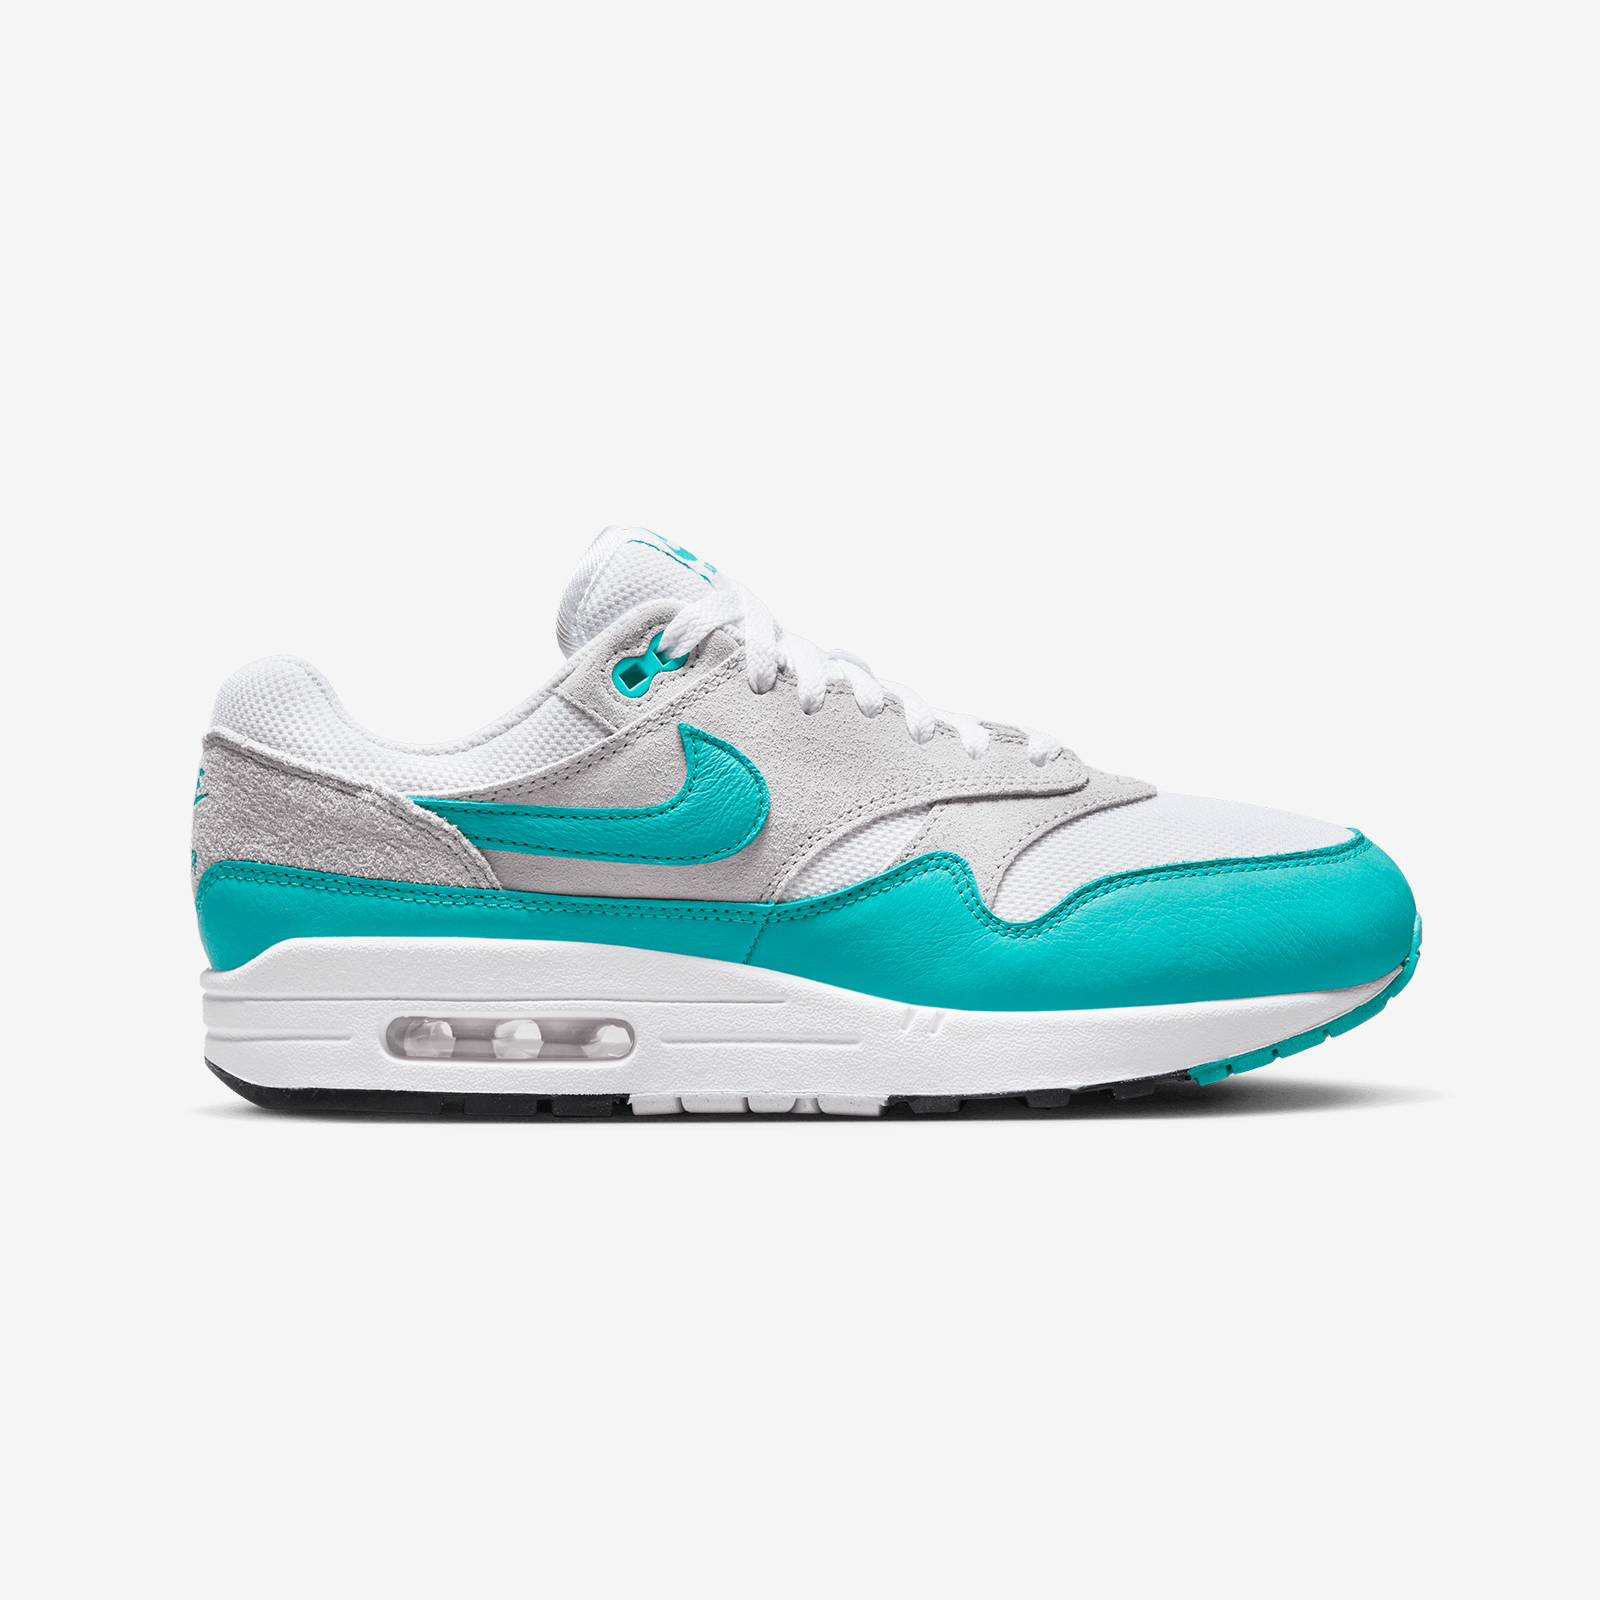 NIKE W AIR MAX 1 LX OBSIDIAN Now available to shop at 24 Kilates